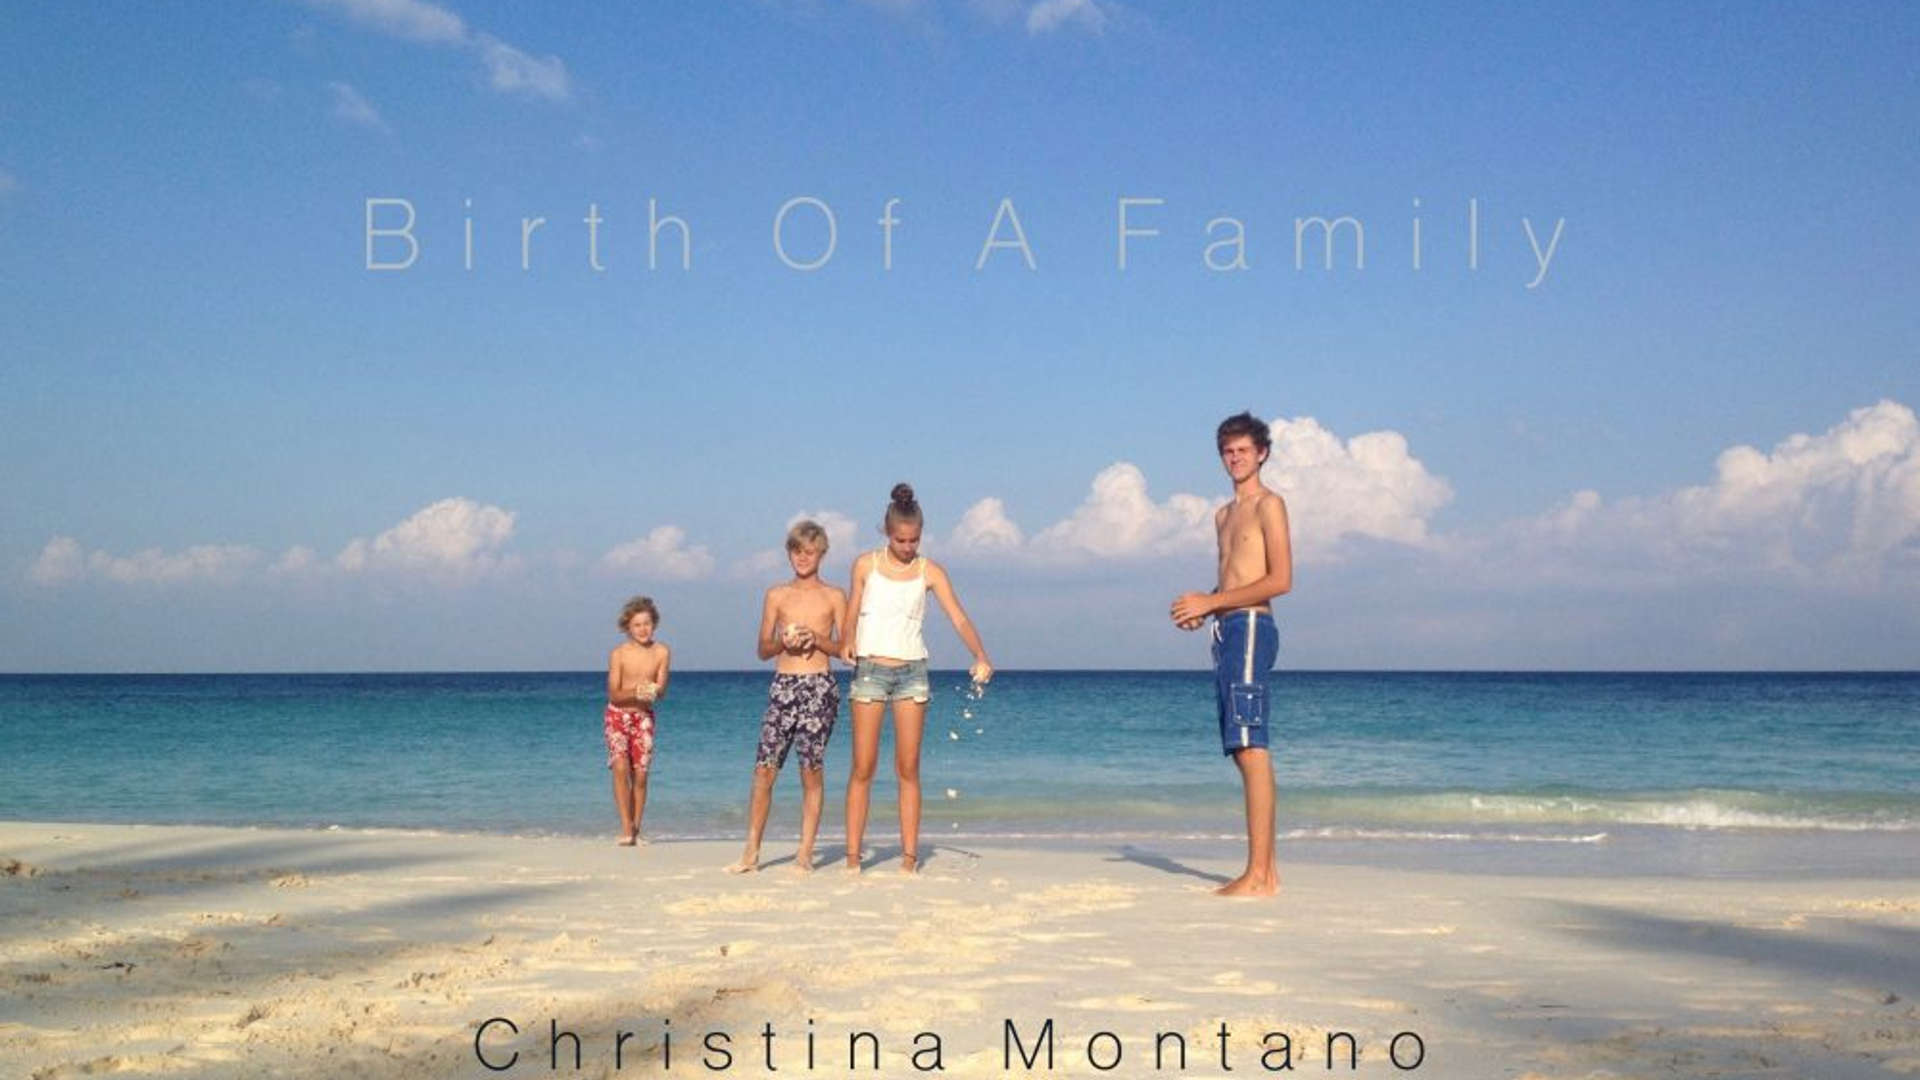 Watch Full Movie - Birth of a Family